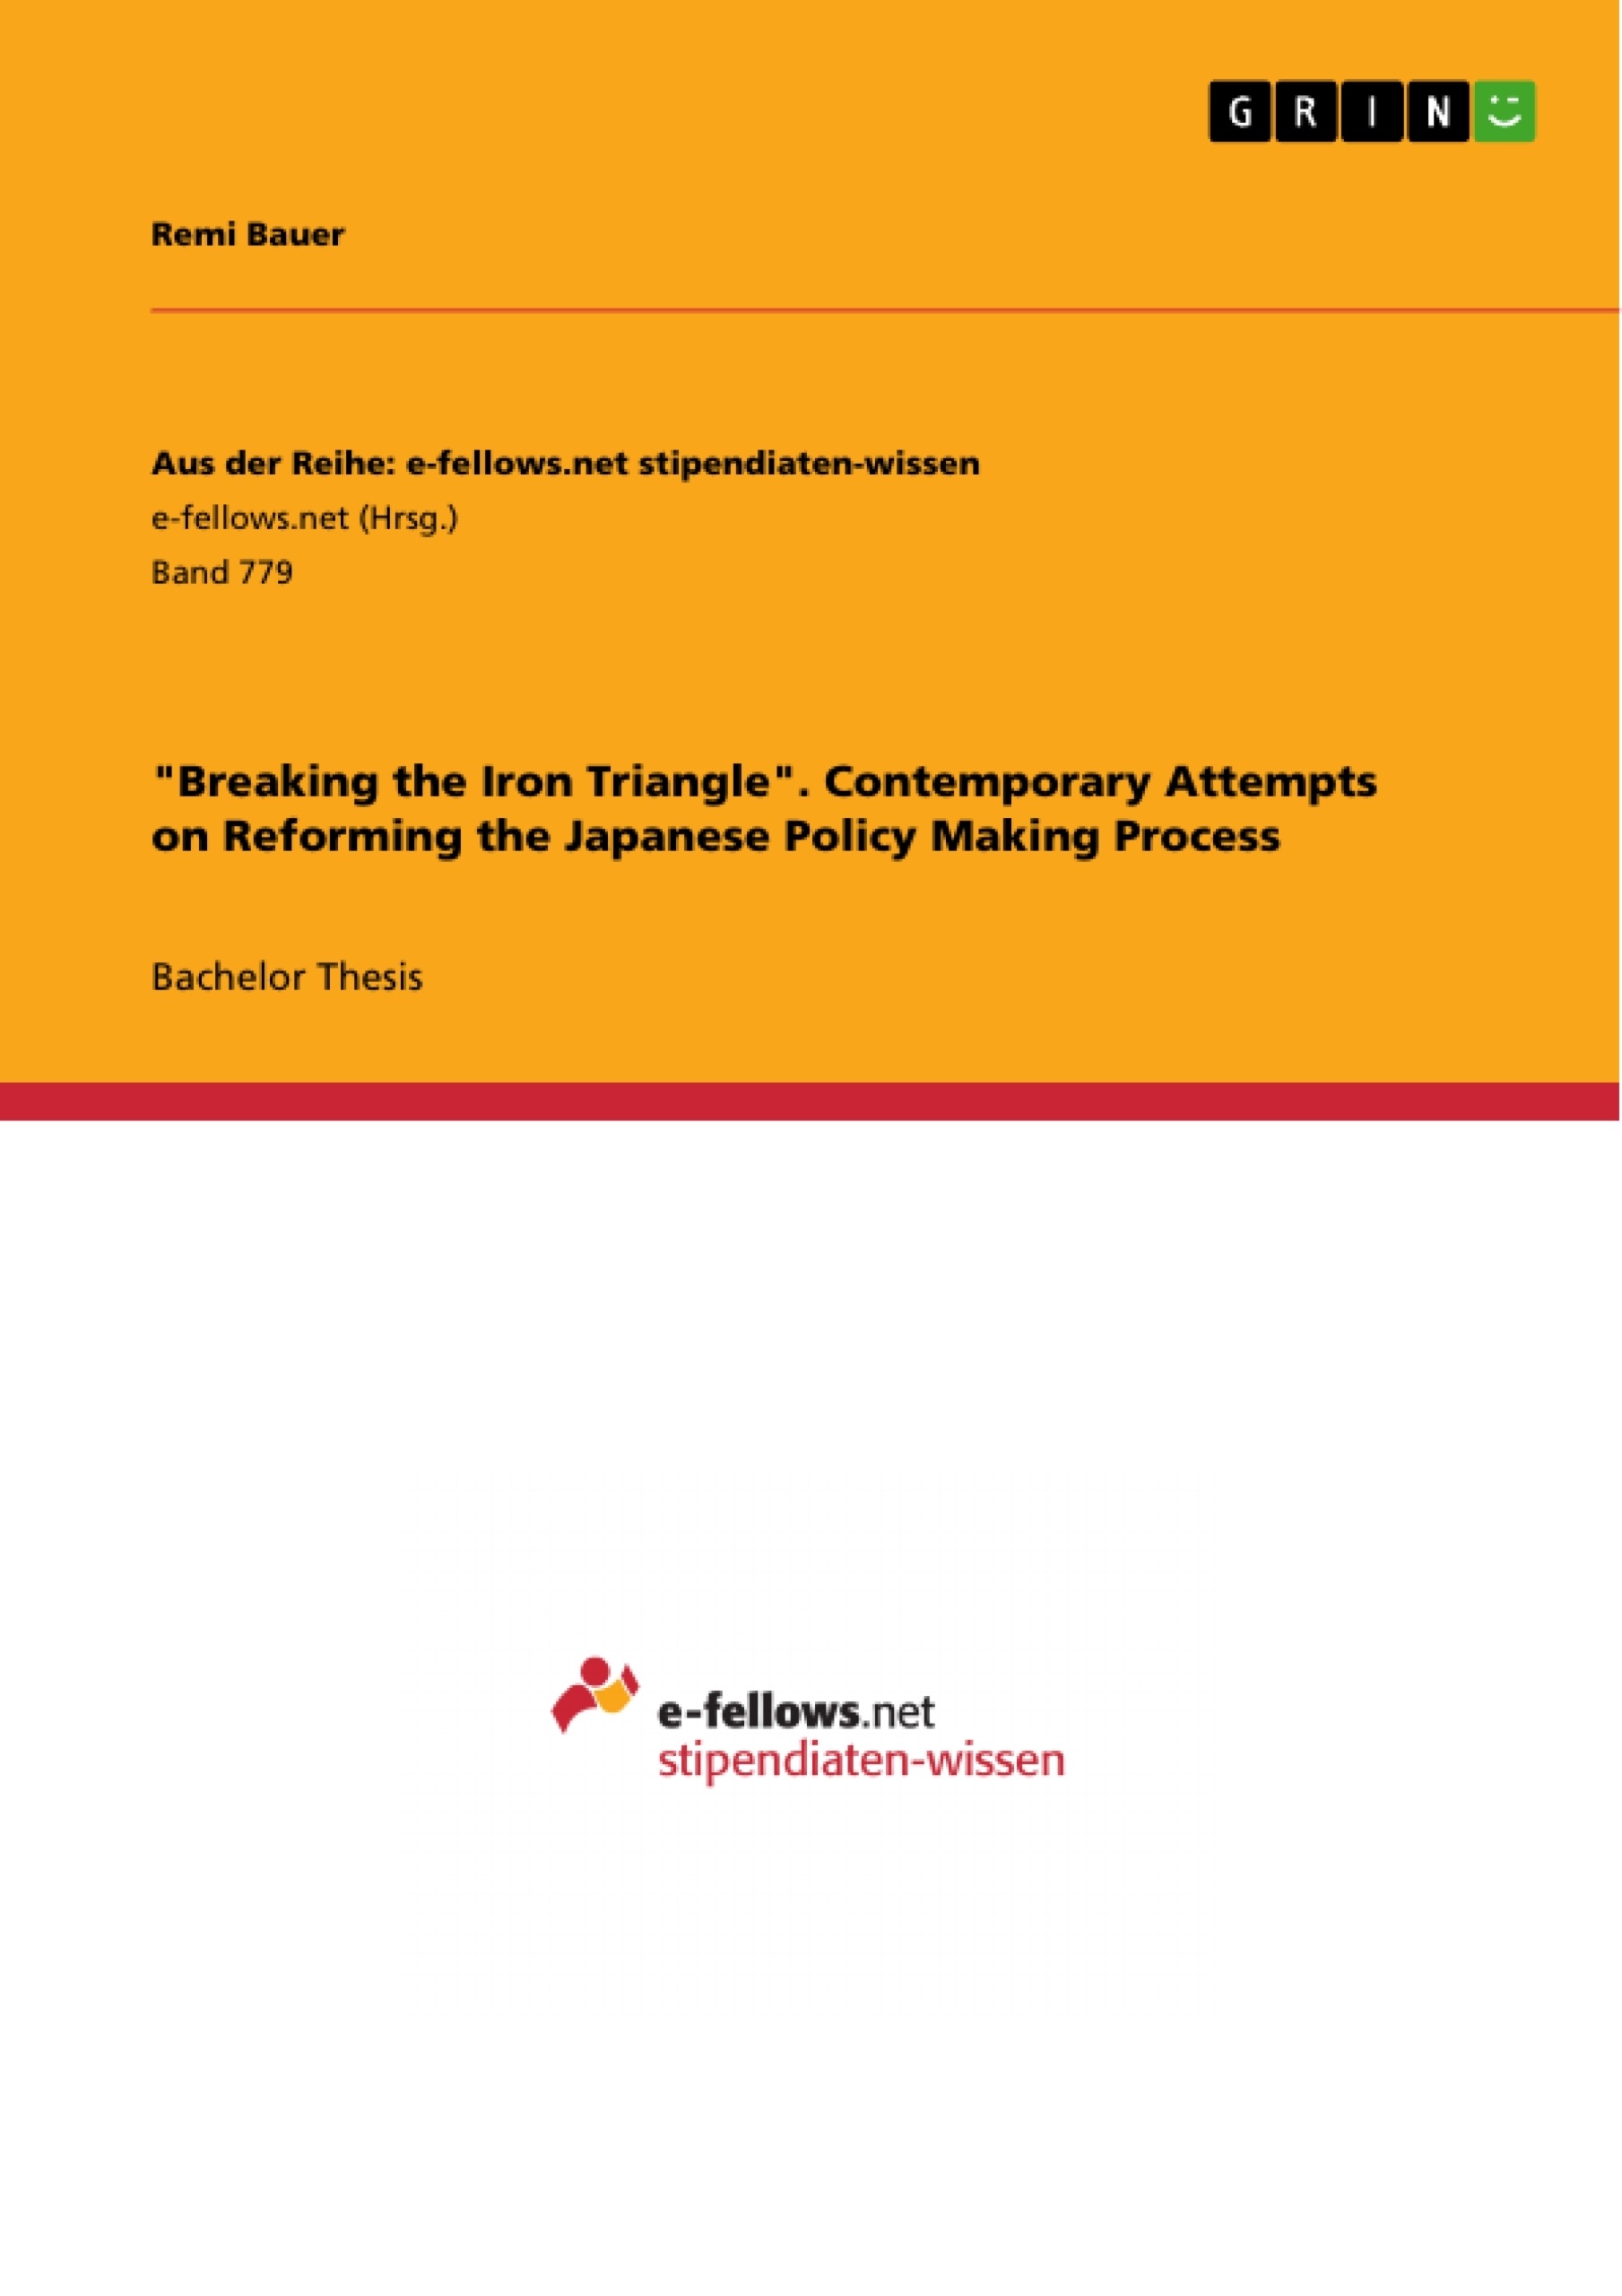 Titre: "Breaking the Iron Triangle". Contemporary Attempts on Reforming the Japanese Policy Making Process